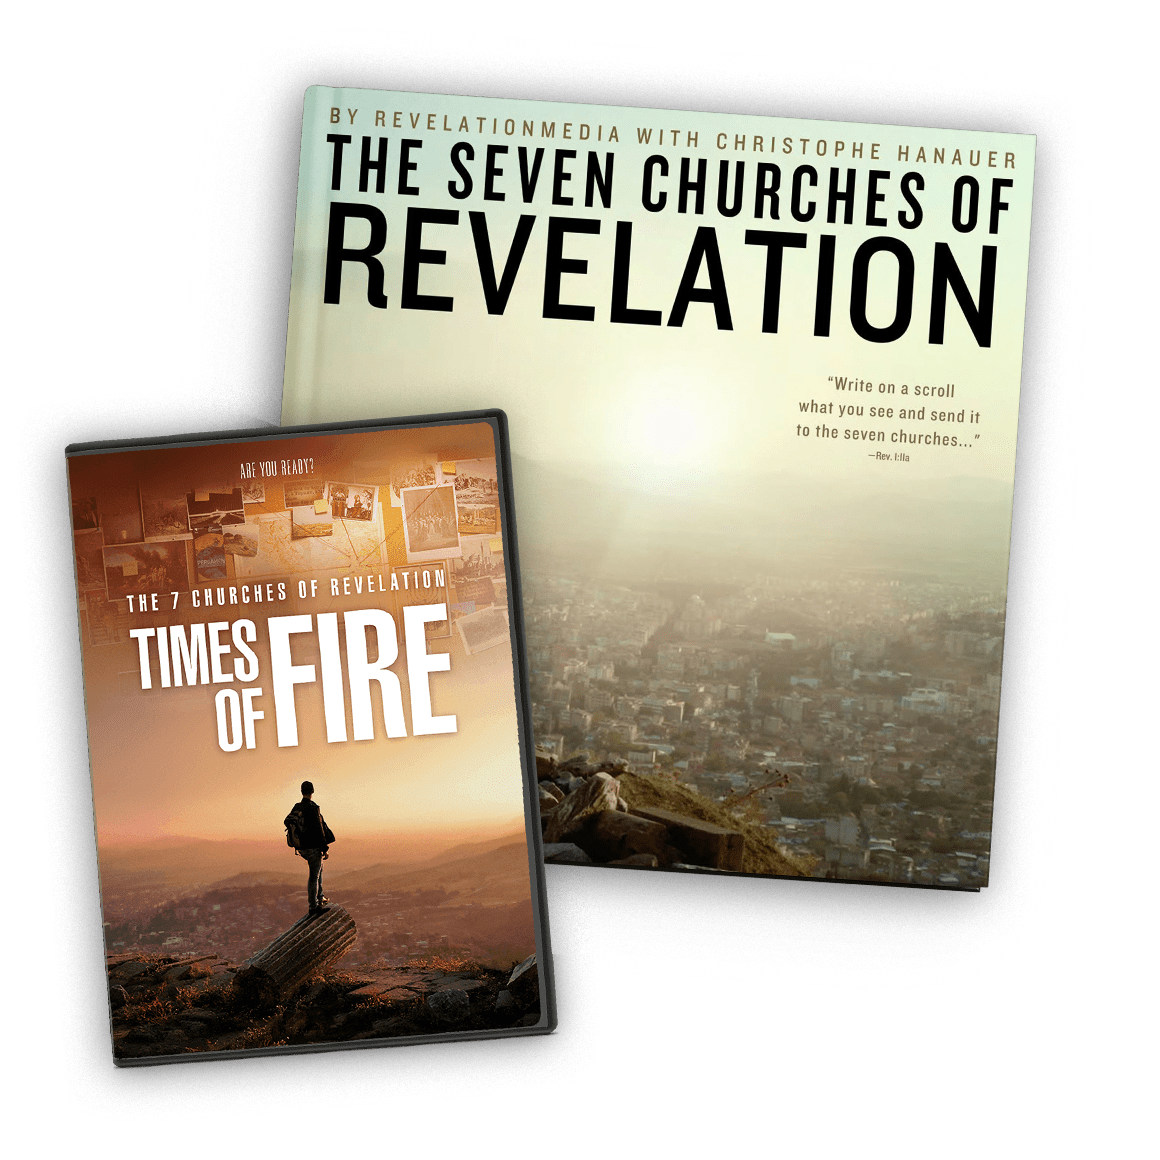 The 7 Churches of Revelation: Times of Fire DVD and The Seven Churches of Revelation Book